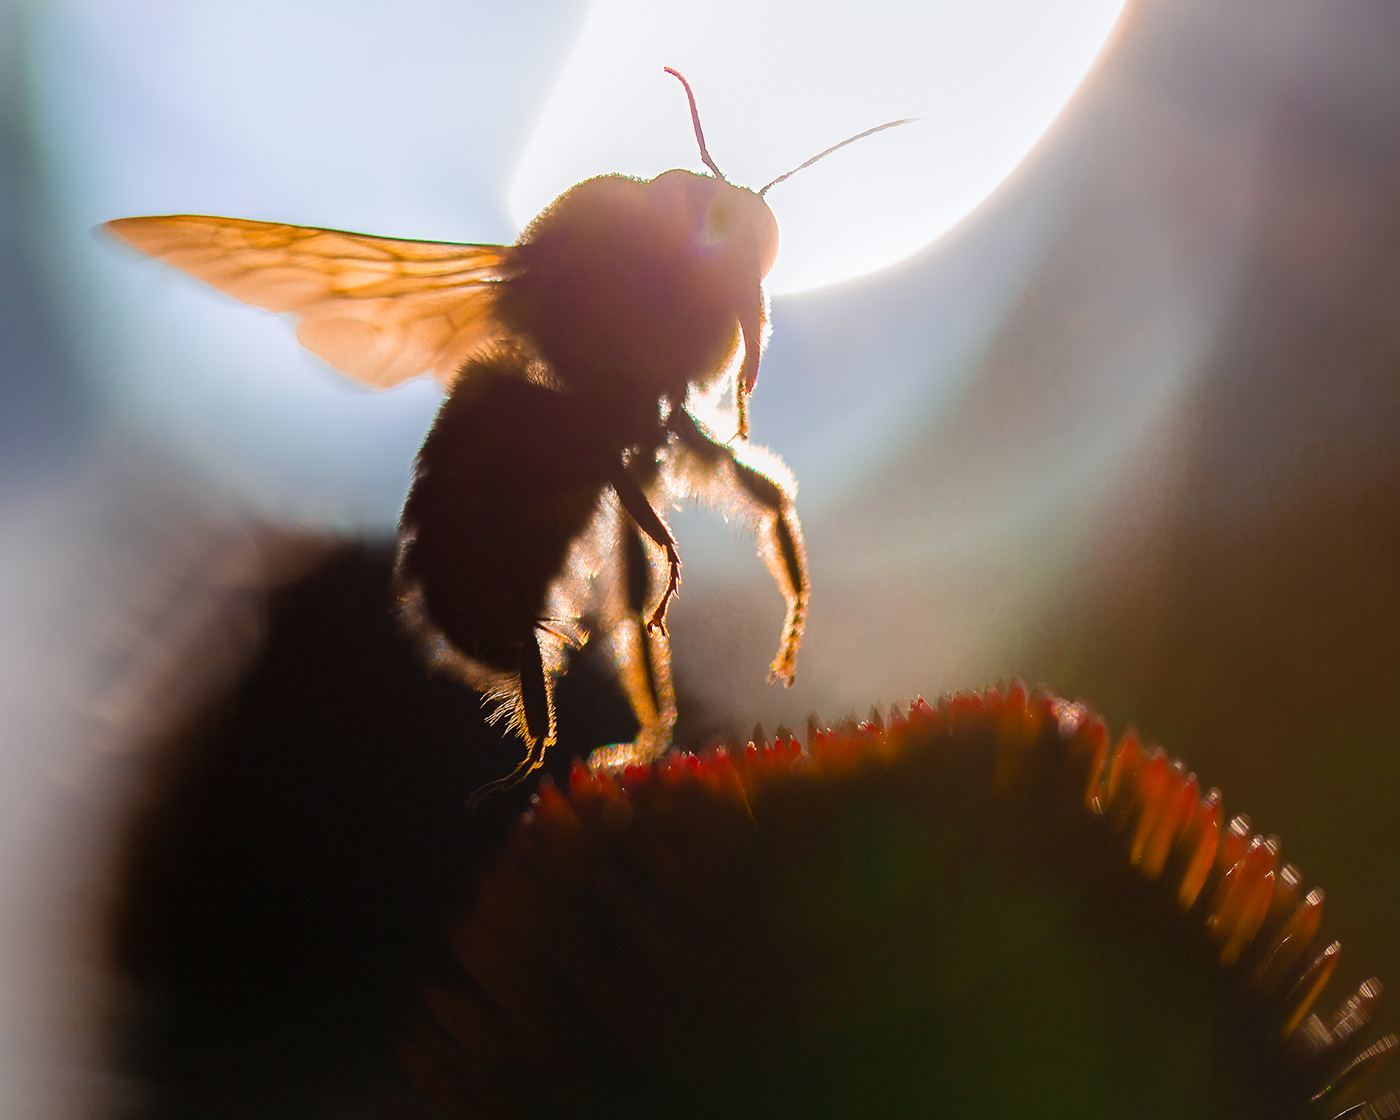 frozen on takeoff and silhouetted against the sun, a bumblebee takes flight.